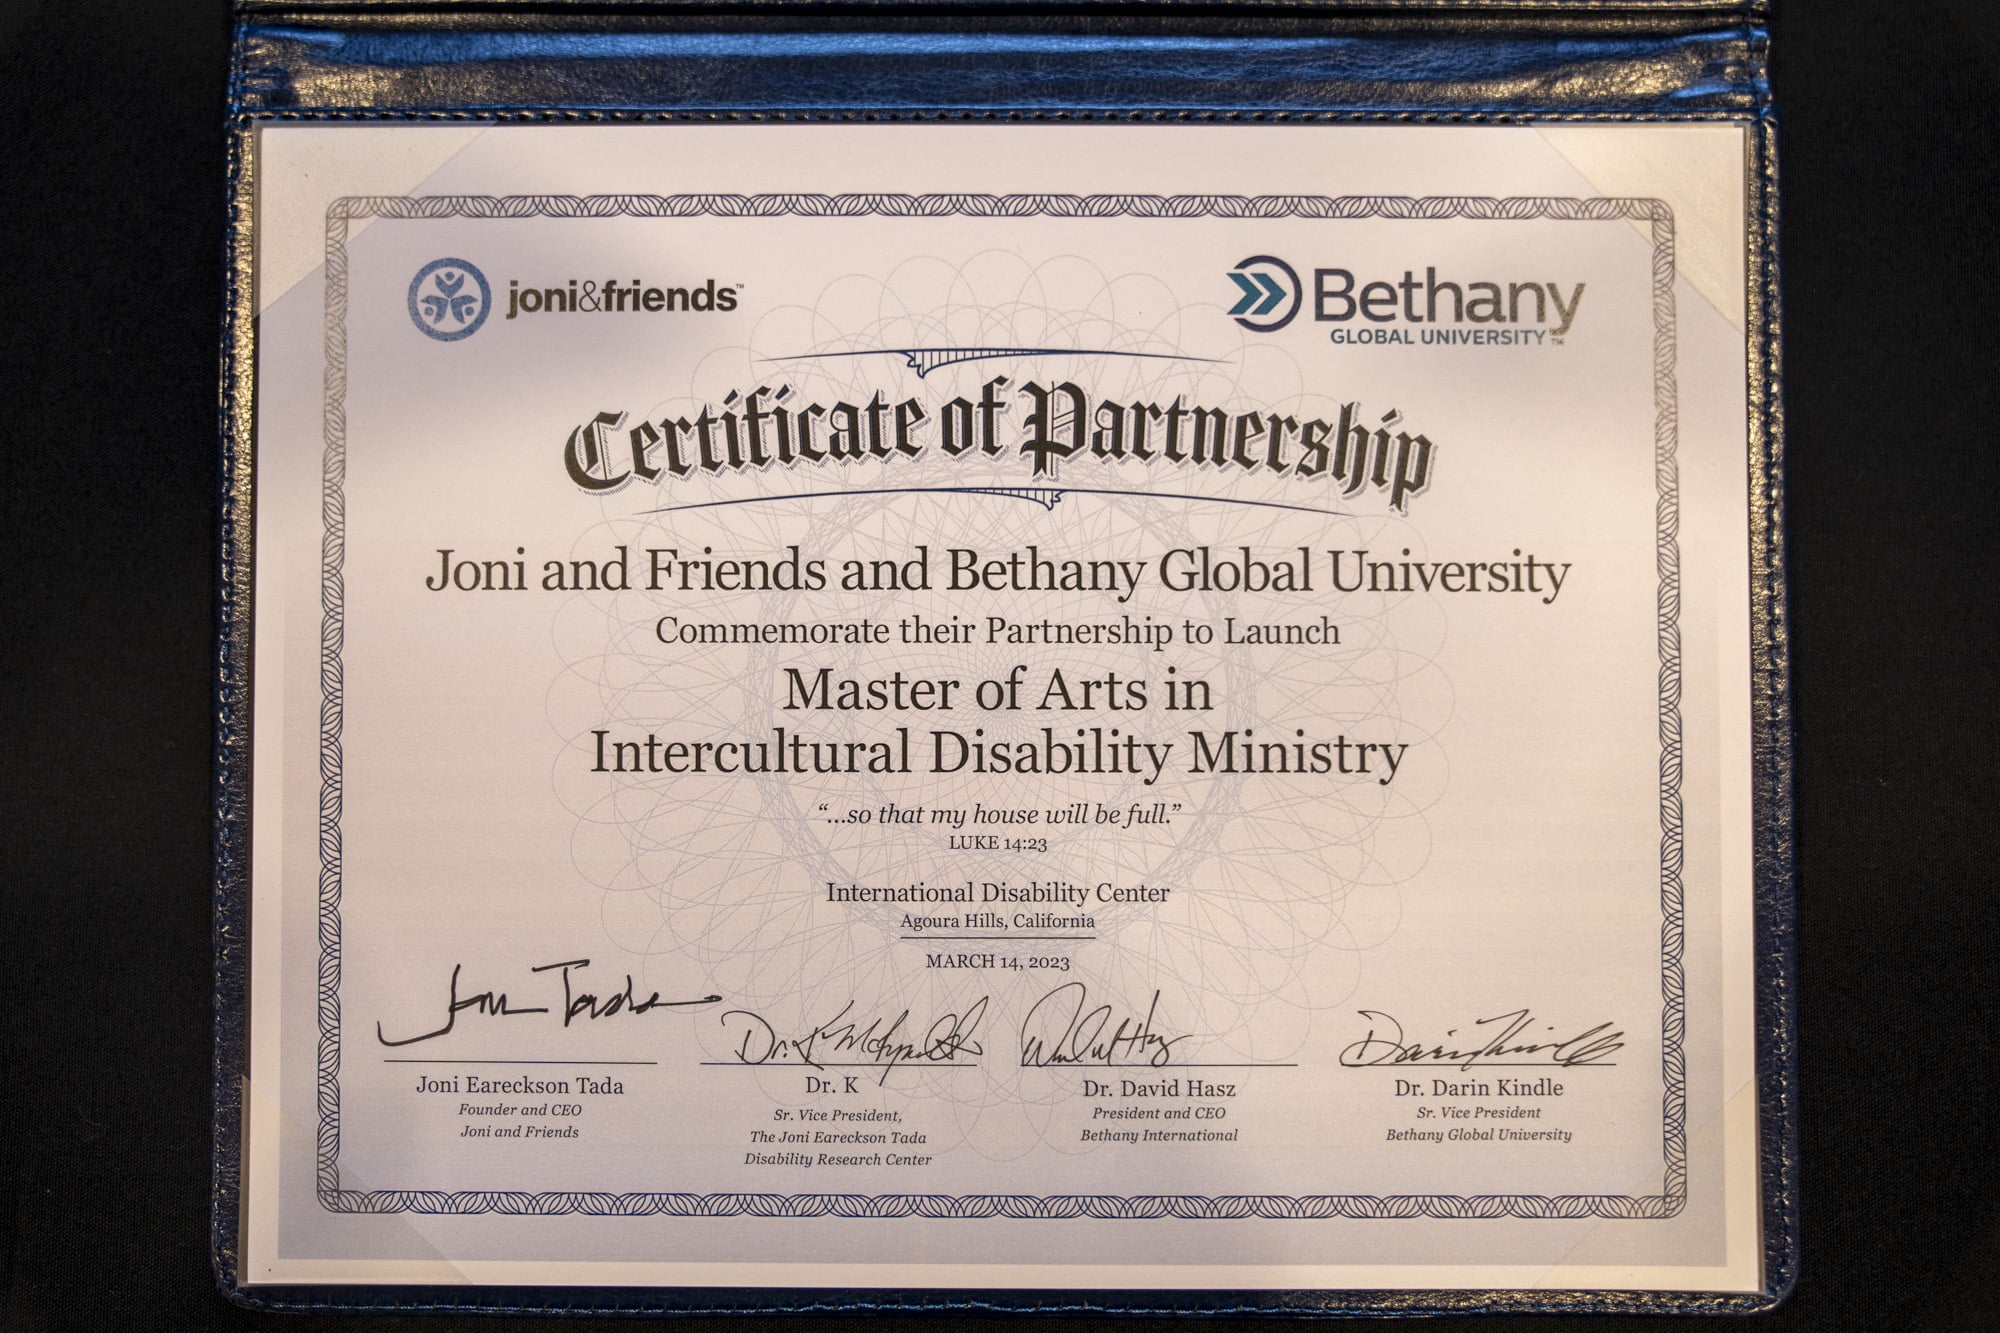 A certificate of partnership with the logo for Joni and Friends on one side and the logo for Bethany on the other side.